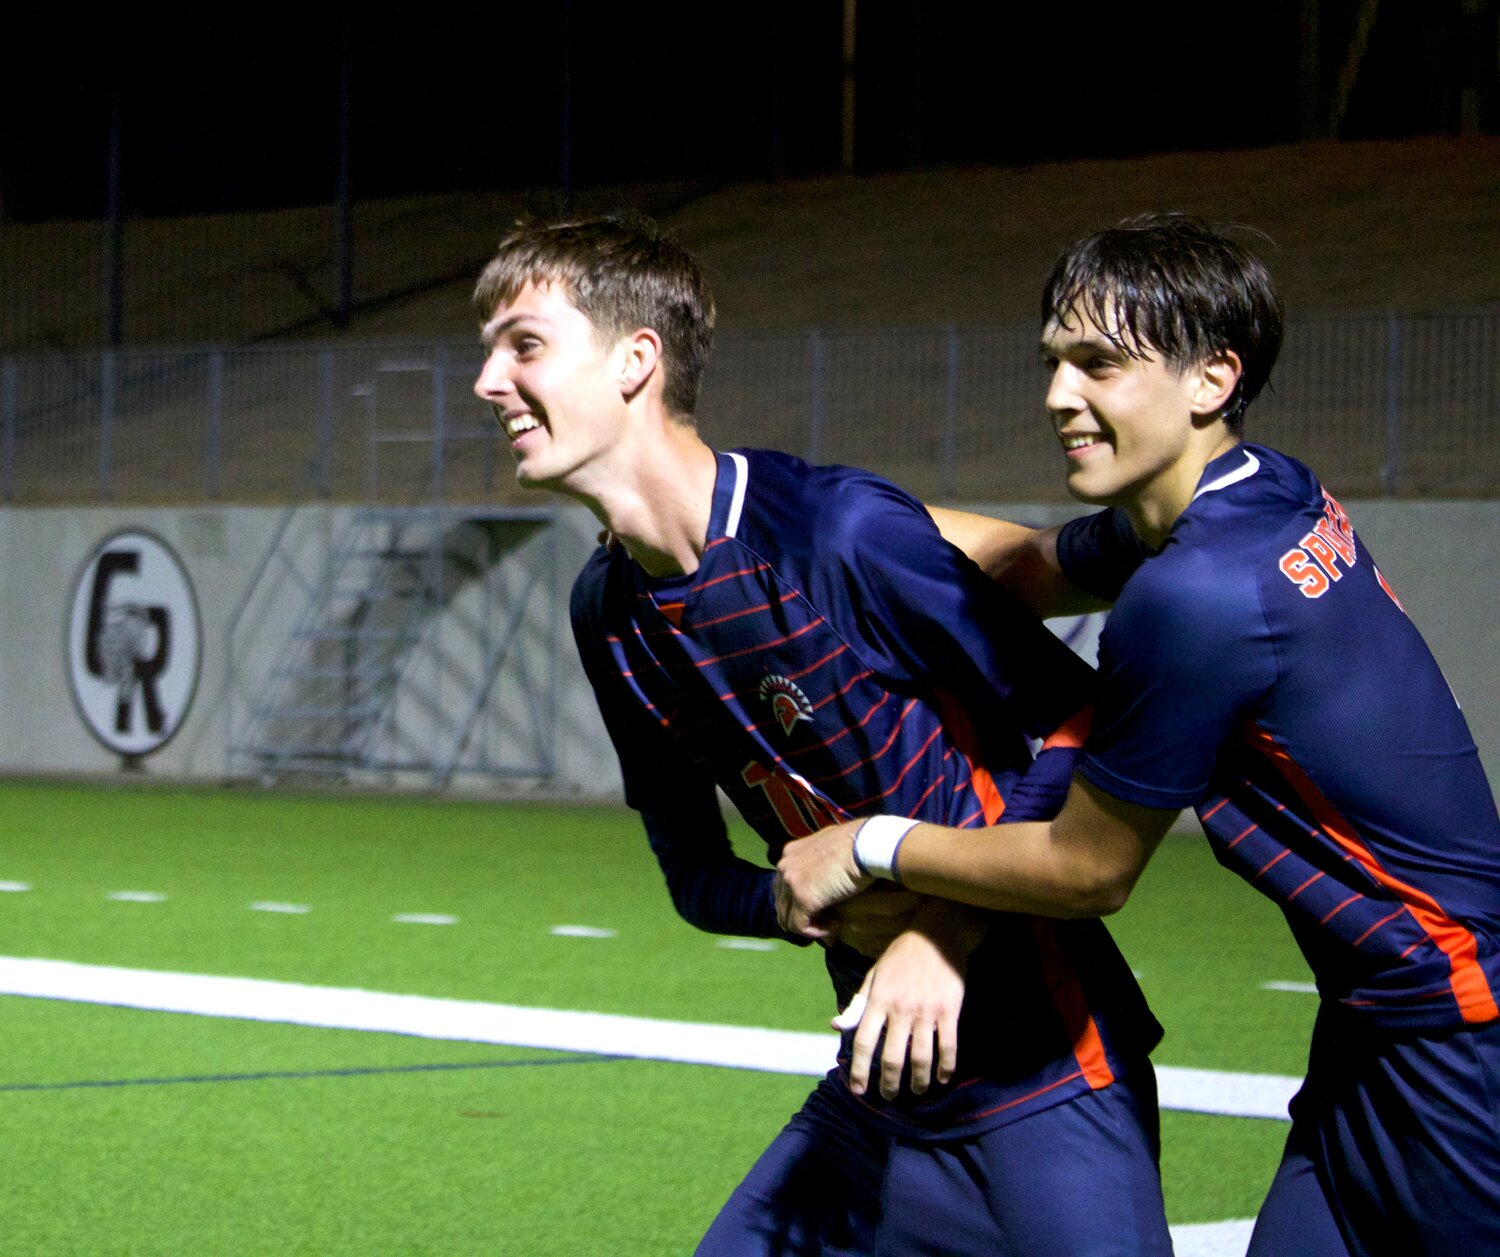 Aidan Morrison and Noa Stasic celebrate after Morrison scored a goal during Friday’s game between Seven Lakes and Jordan at Legacy Stadium.